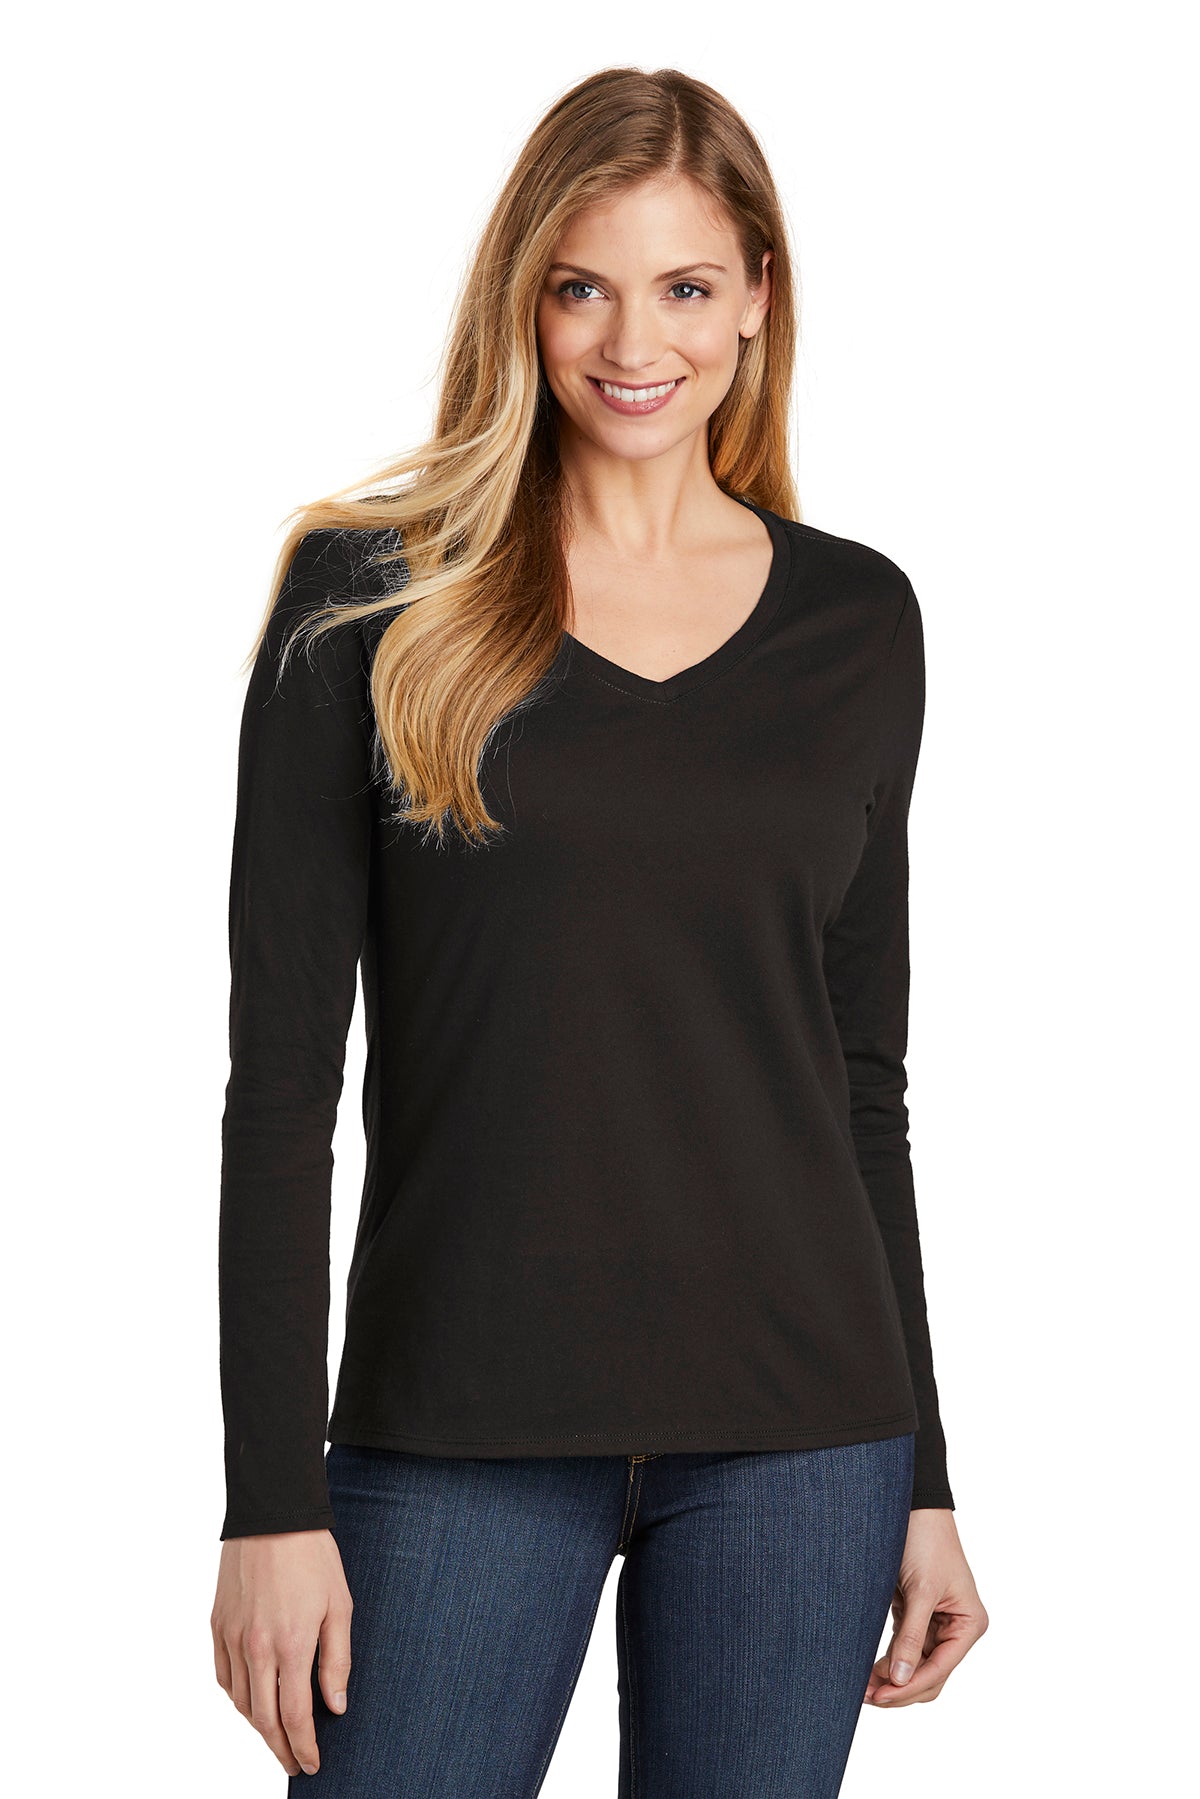 District ® Women’s Very Important Tee ® Long Sleeve V-Neck dt6201